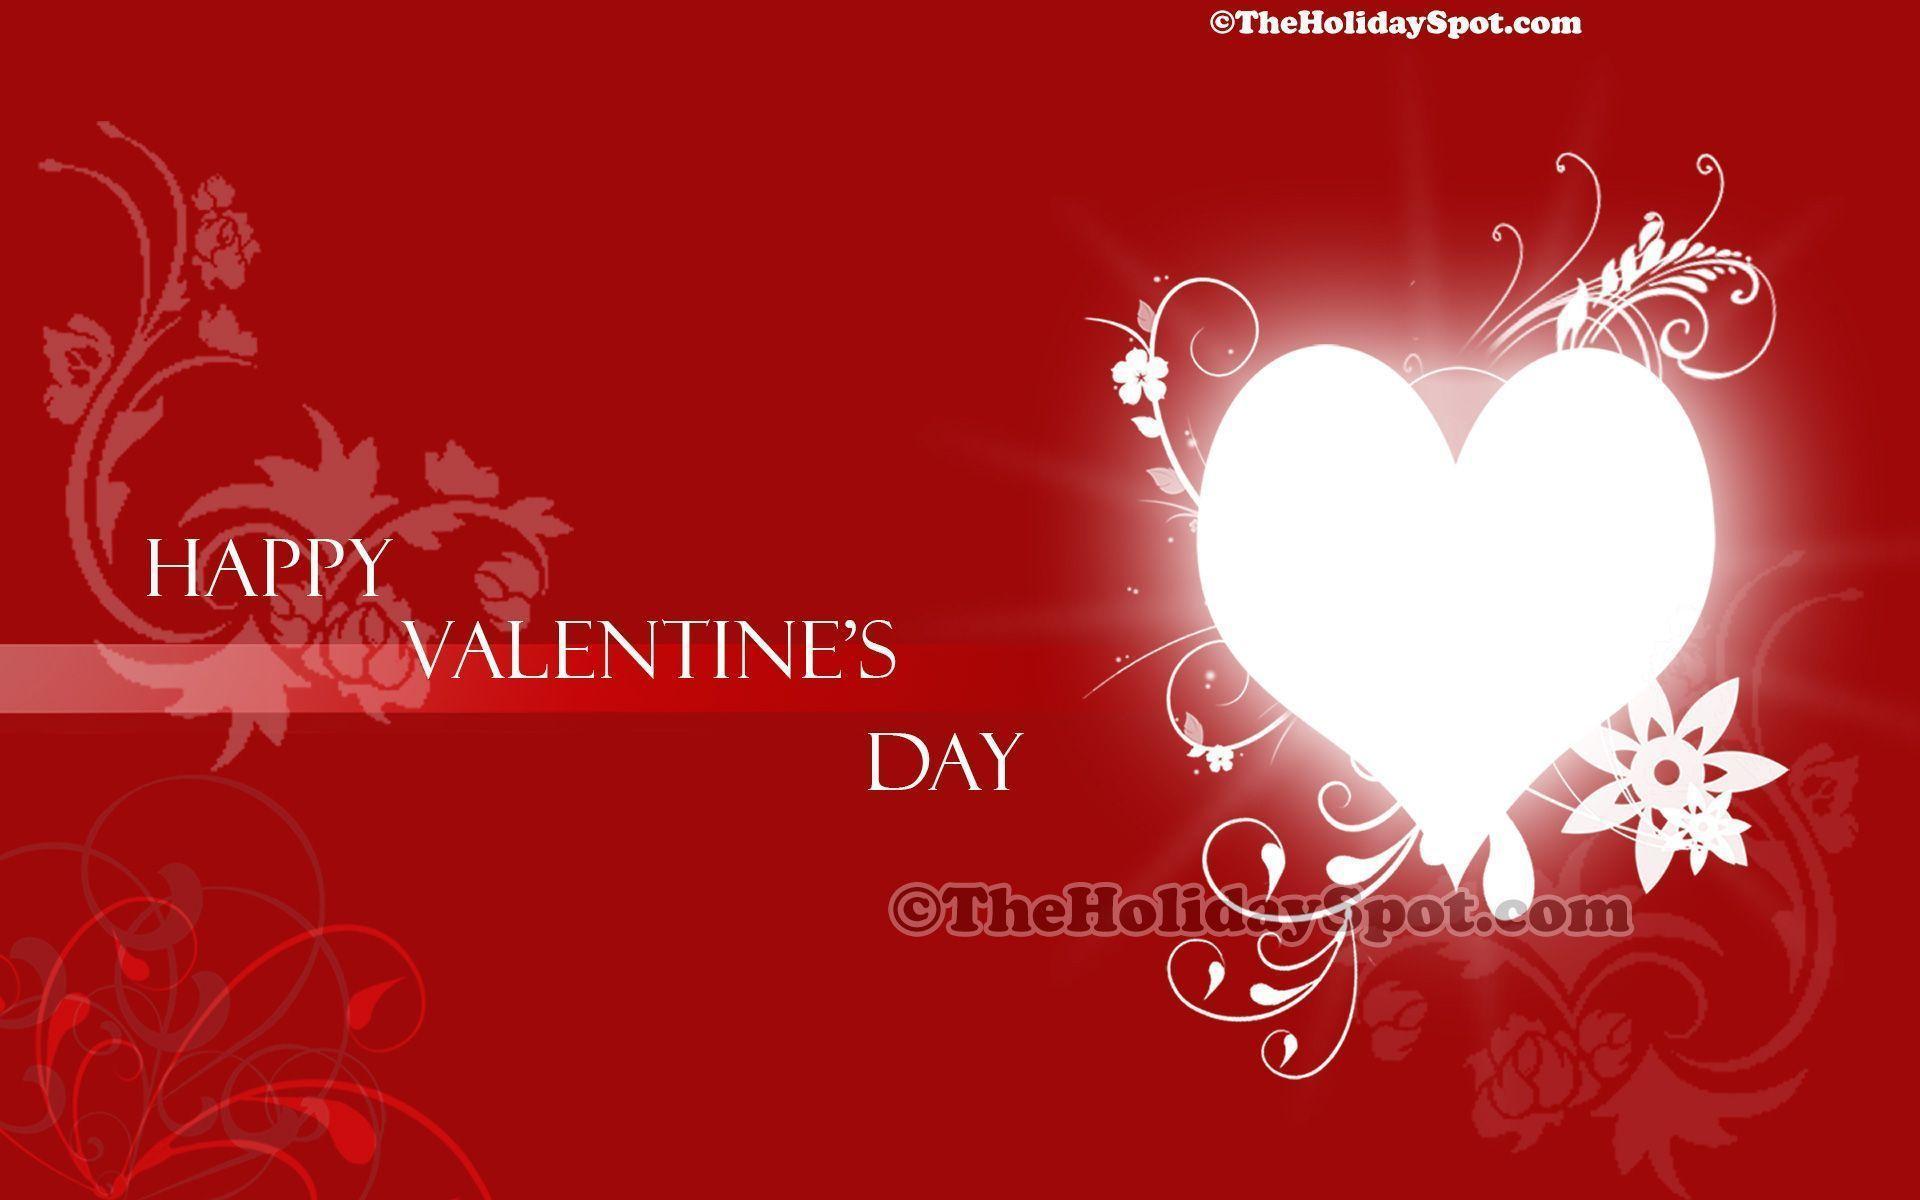 Download} Full HD Valentine&;s Day Wallpaper for Mobile. PC